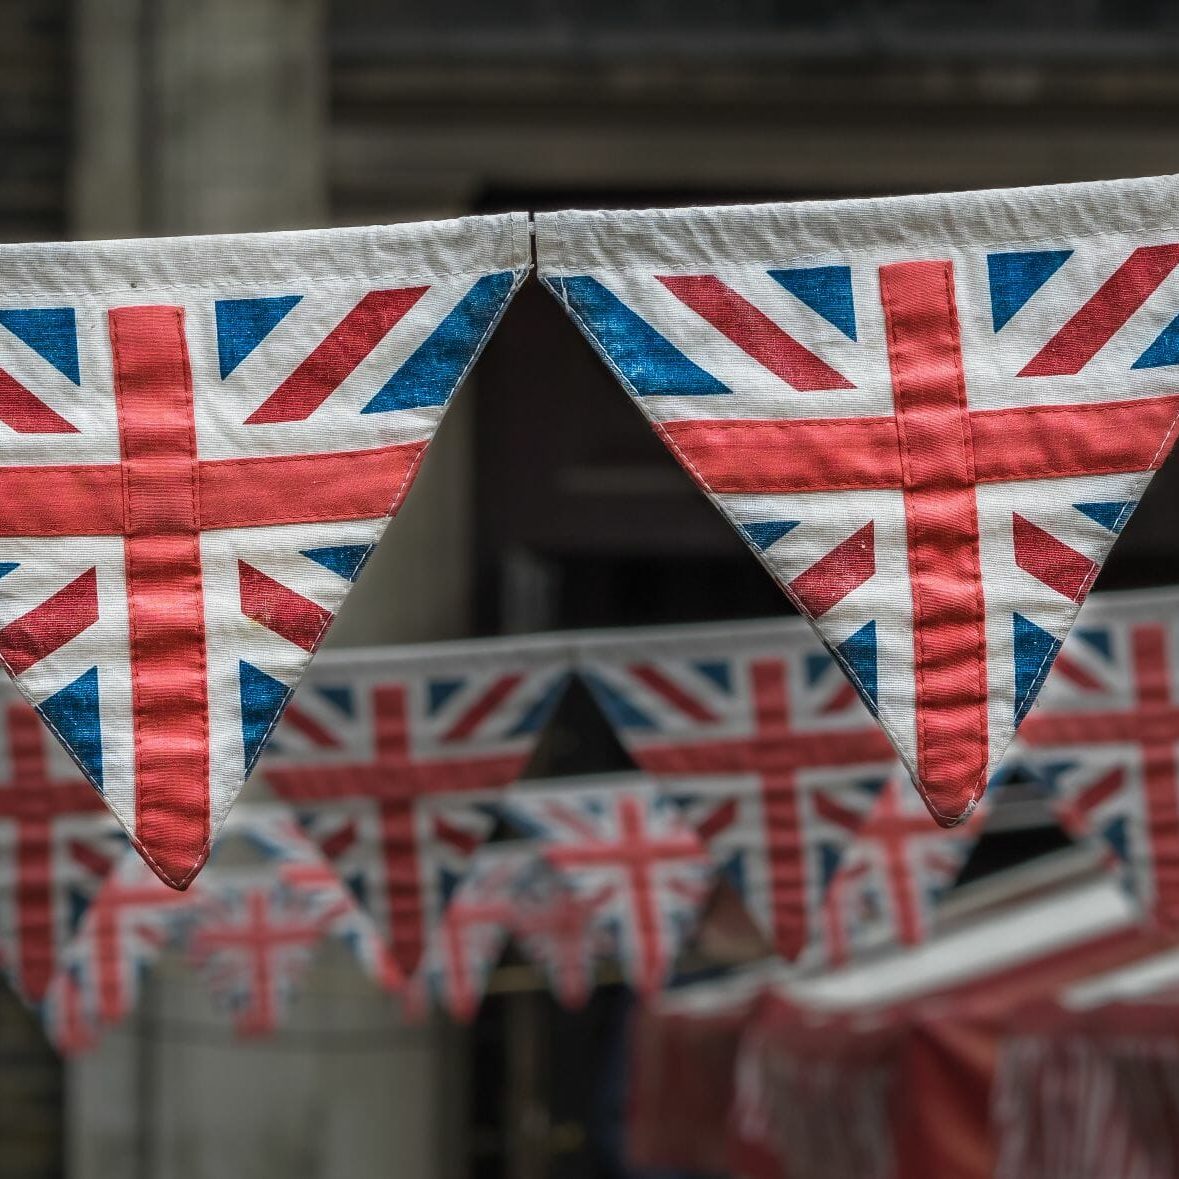 rows-of-union-jack-bunting-hanging-in-an-open-air